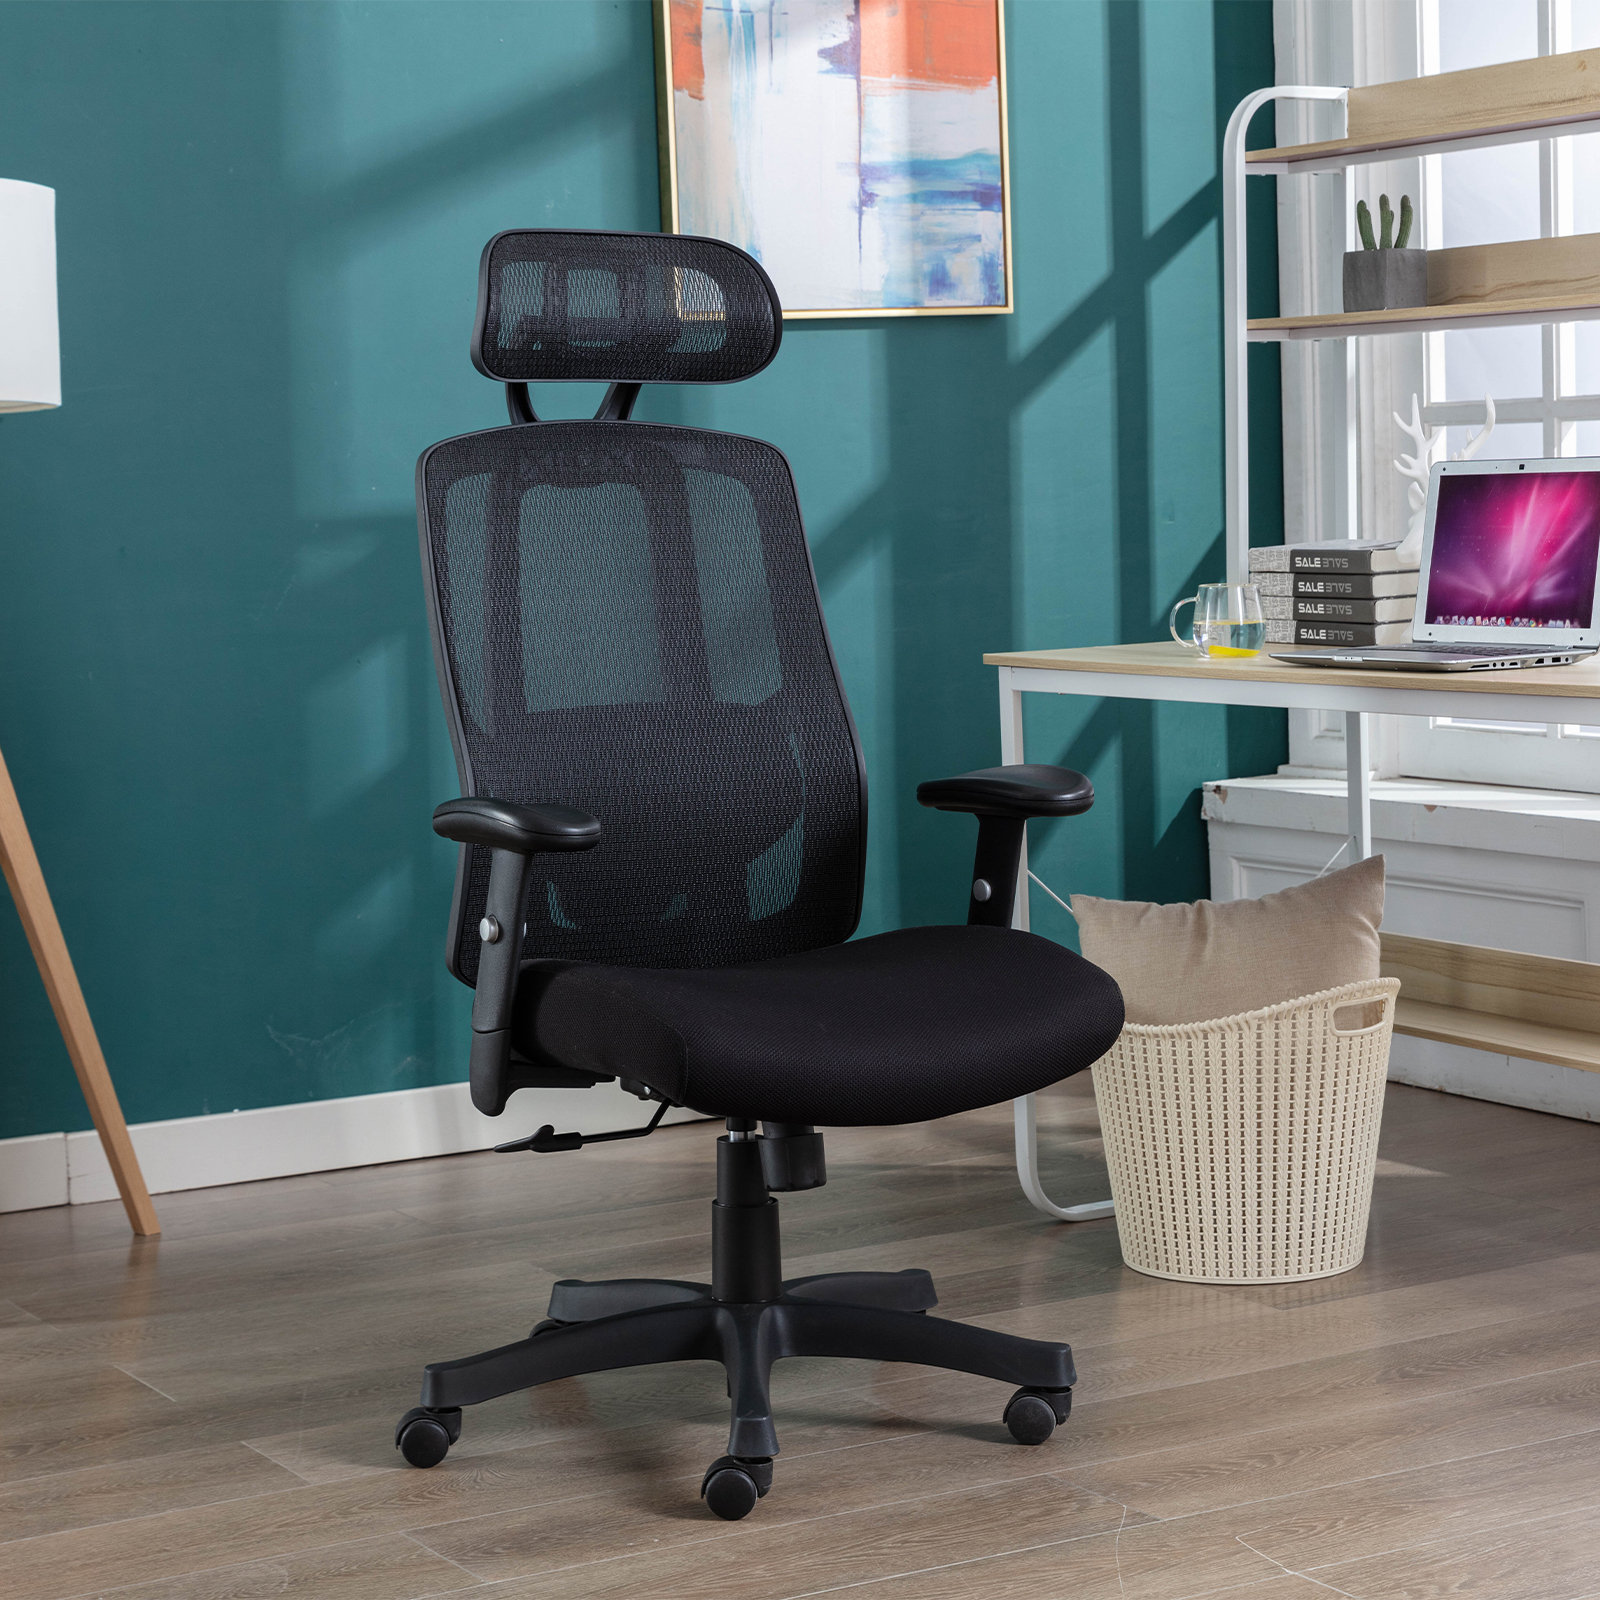 Executive Office Desk Chair With Adjustable Headrest Breathable Mesh High Back With Adjustable Lumbar 